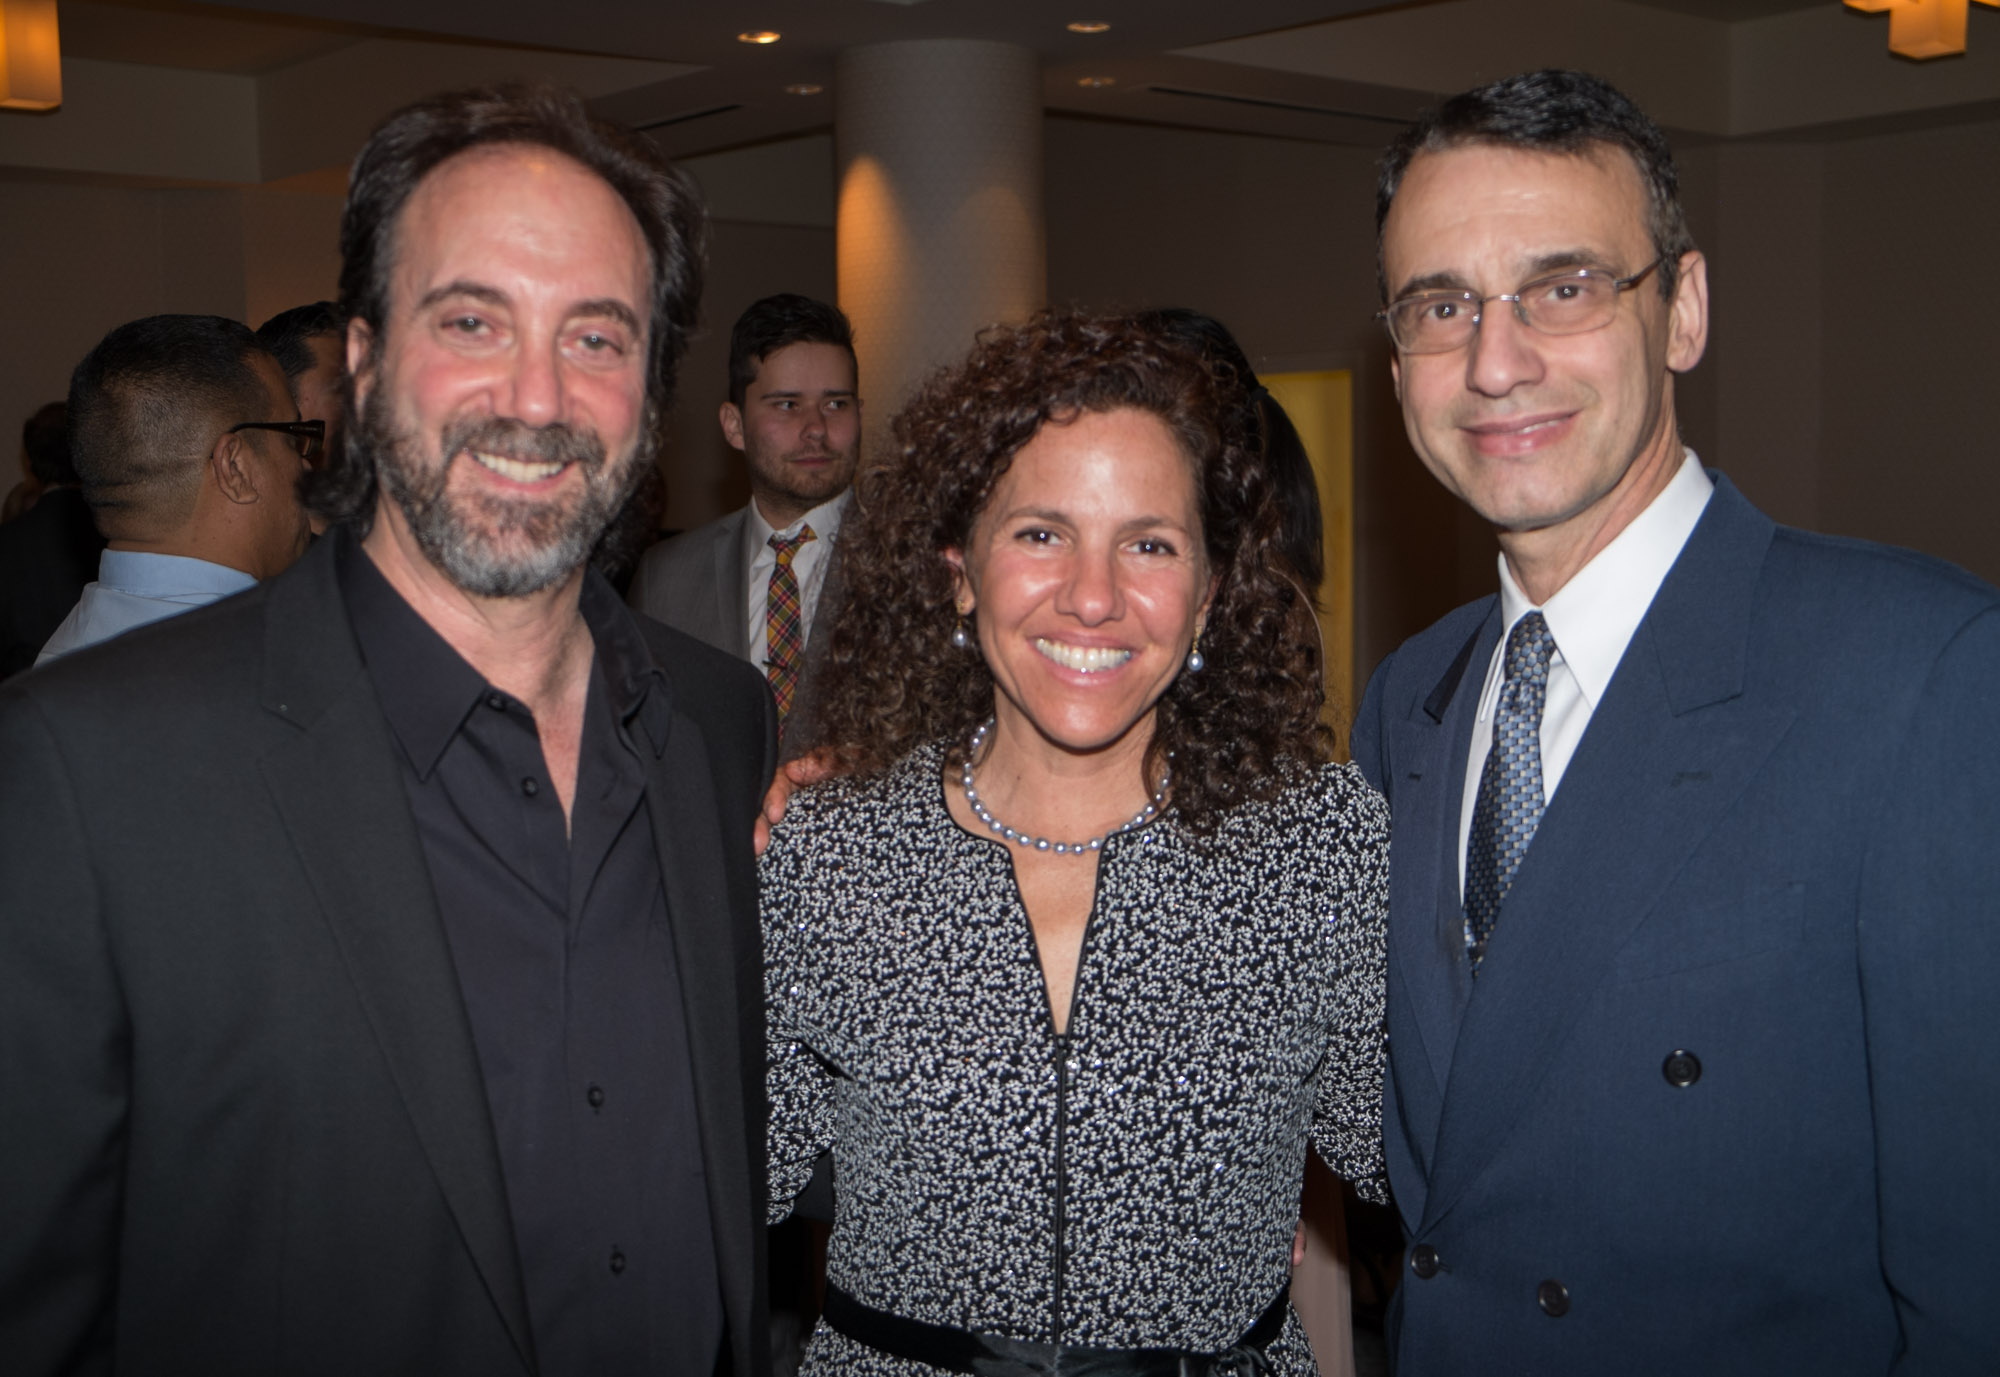 Motion Picture Editors Guild - Board Members Stephen Rivkin and Frank Morrone with Guild staffer Lisa Dosch